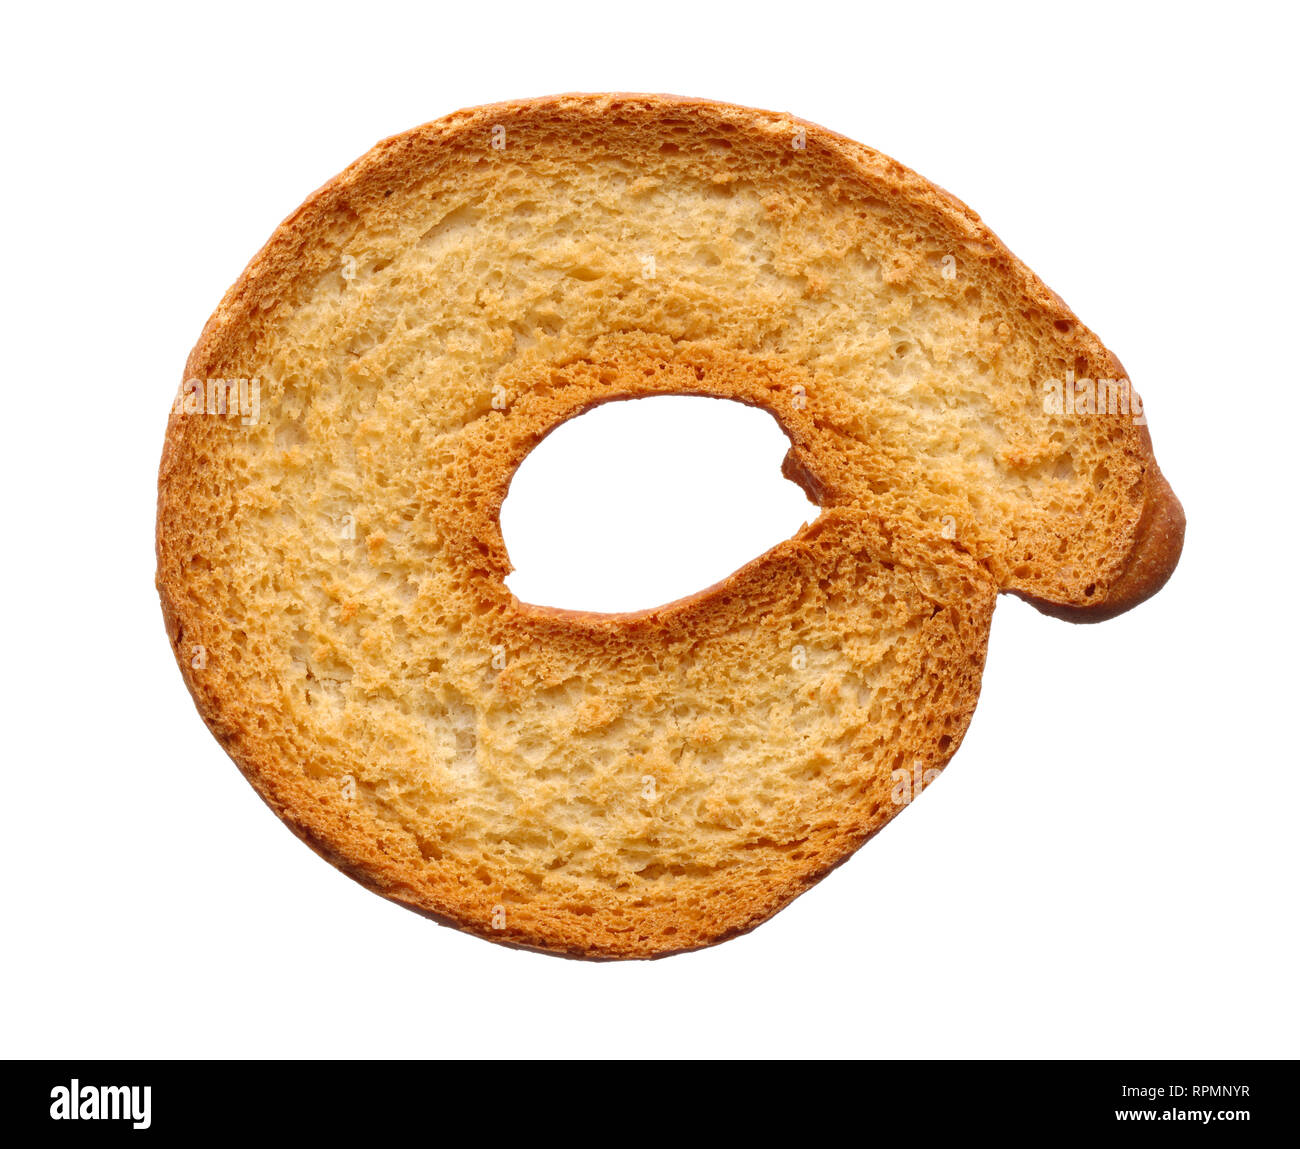 Food and drinks: single roasted bagel, isolated on white background Stock Photo